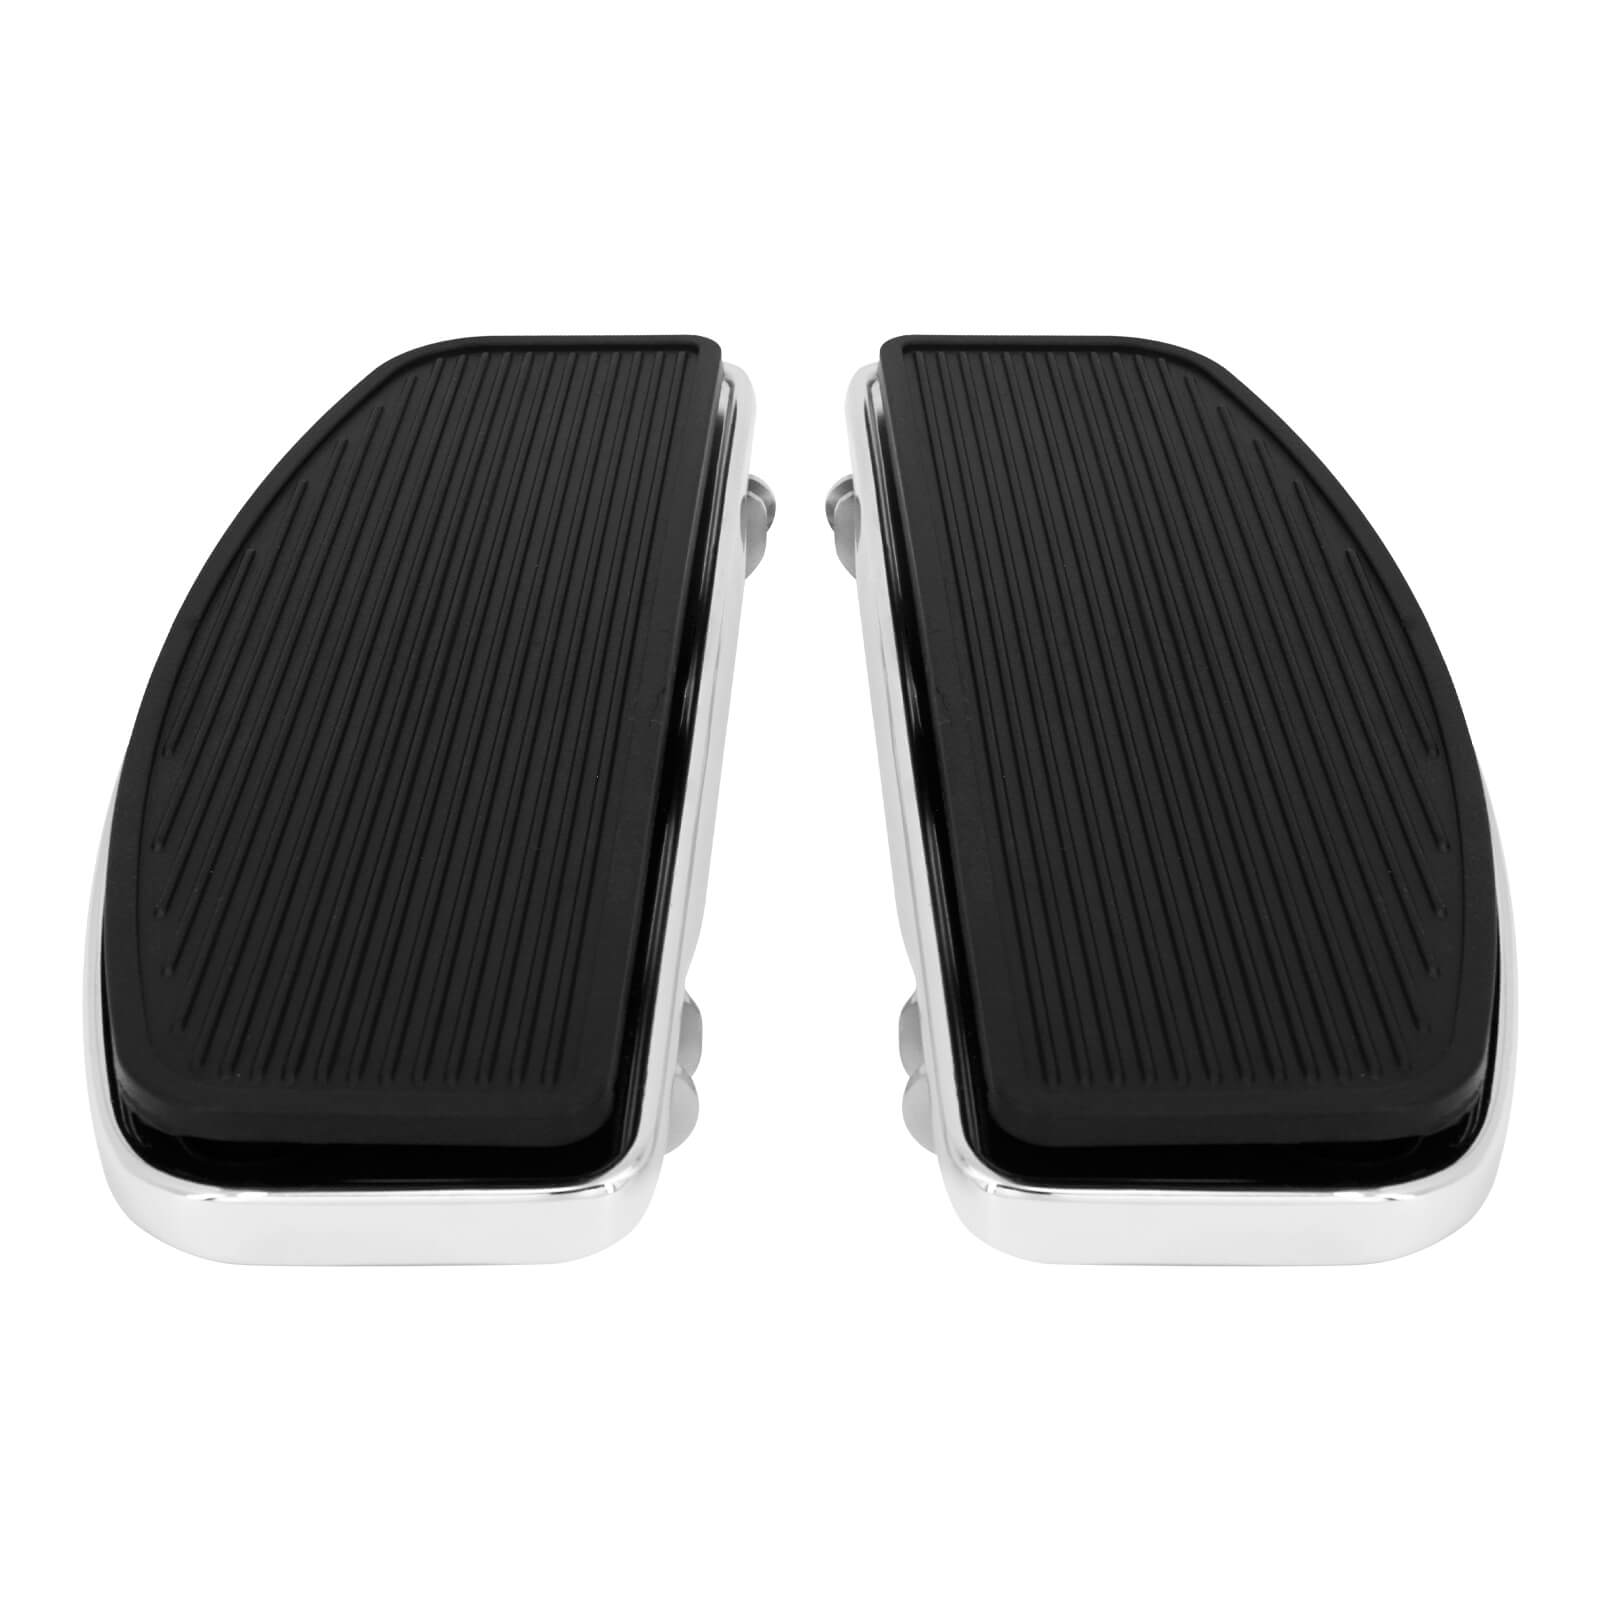 rider-footboards-for-harley-rubber-PE012901